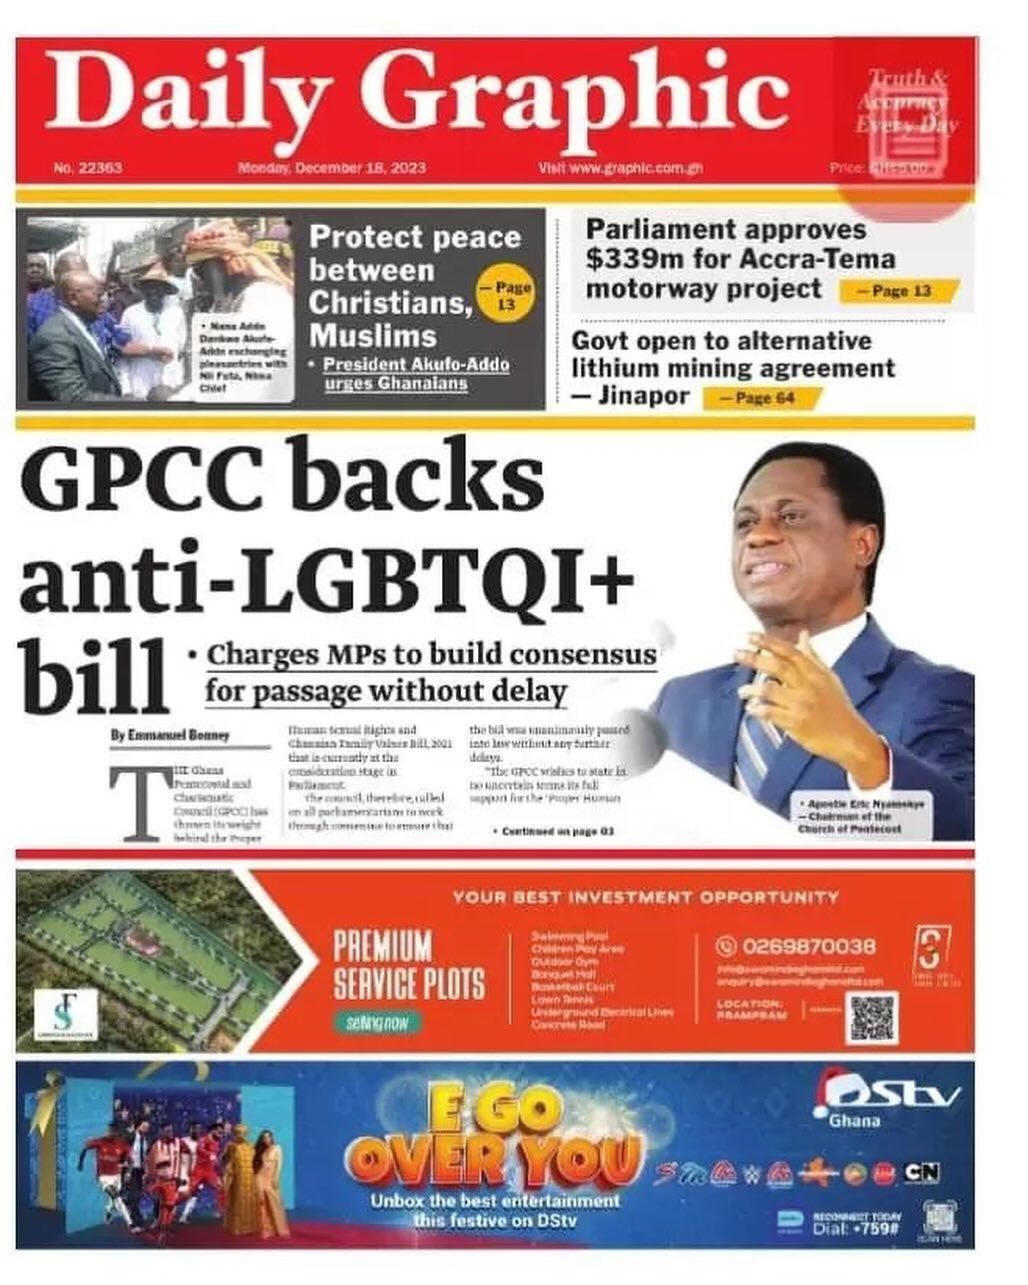 Daily Graphic Newspaper - December 18